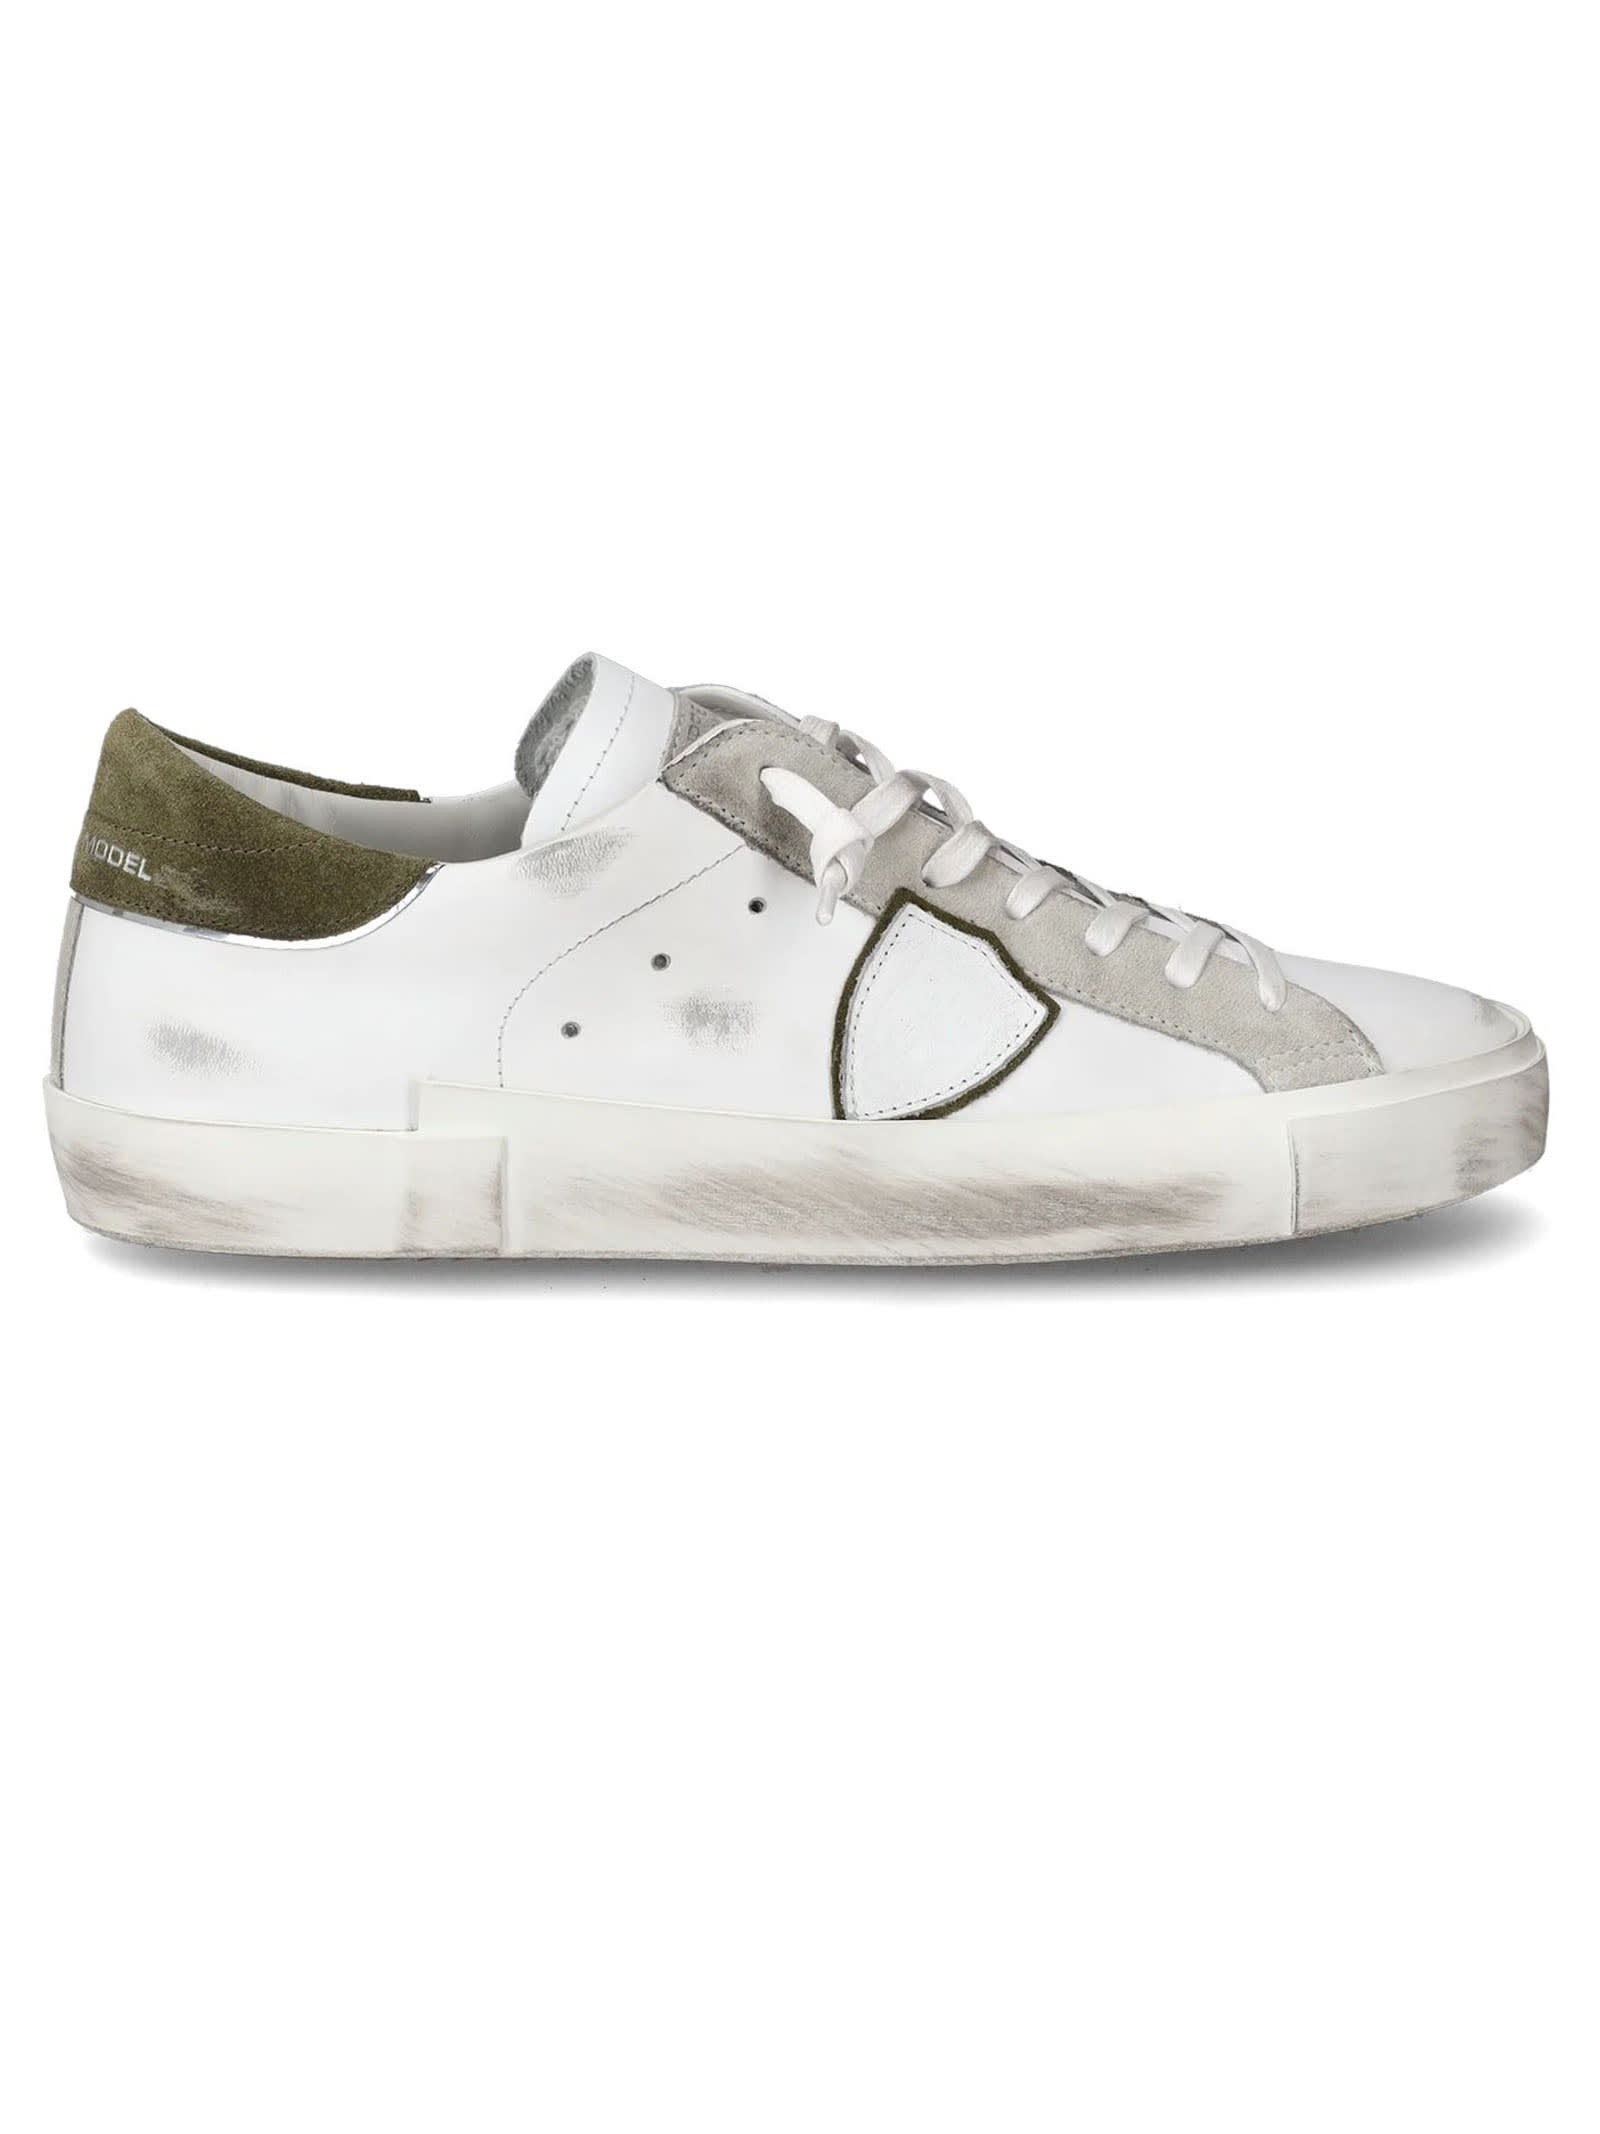 Prsx Low-top Sneakers In Leather, White Green